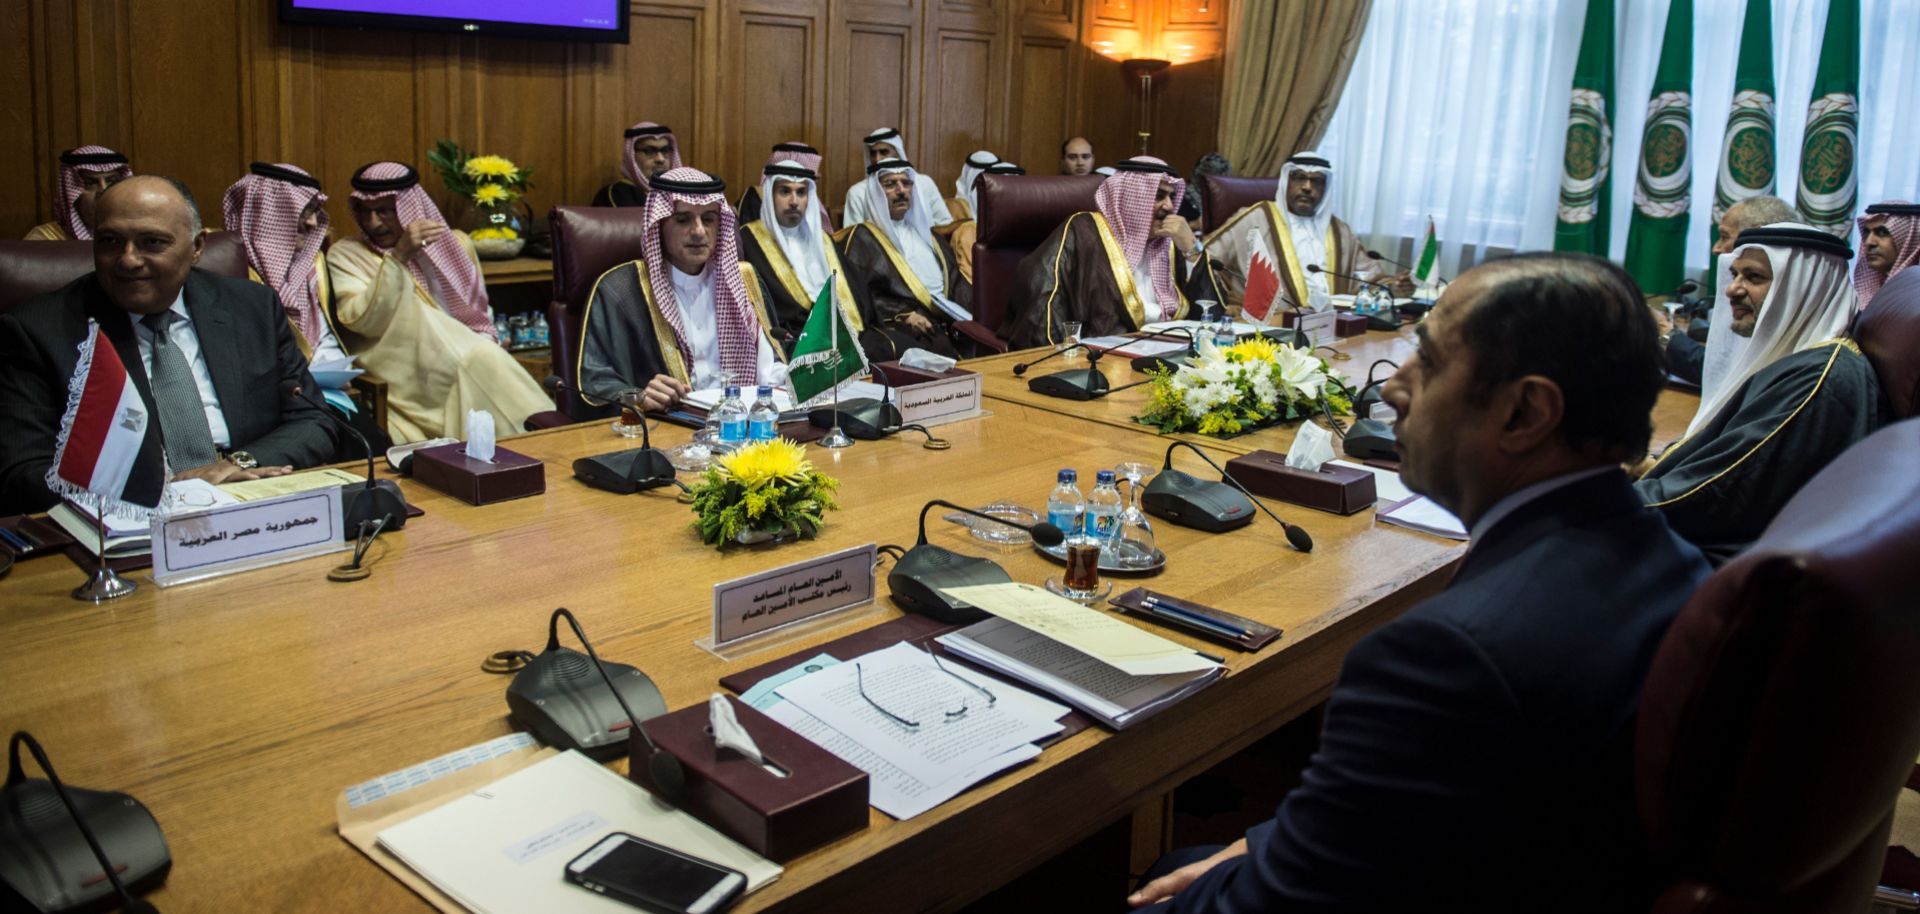 Saudi, Egyptian and Emirati officials convene in Cairo for a meeting Nov. 19 at the Arab League headquarters.